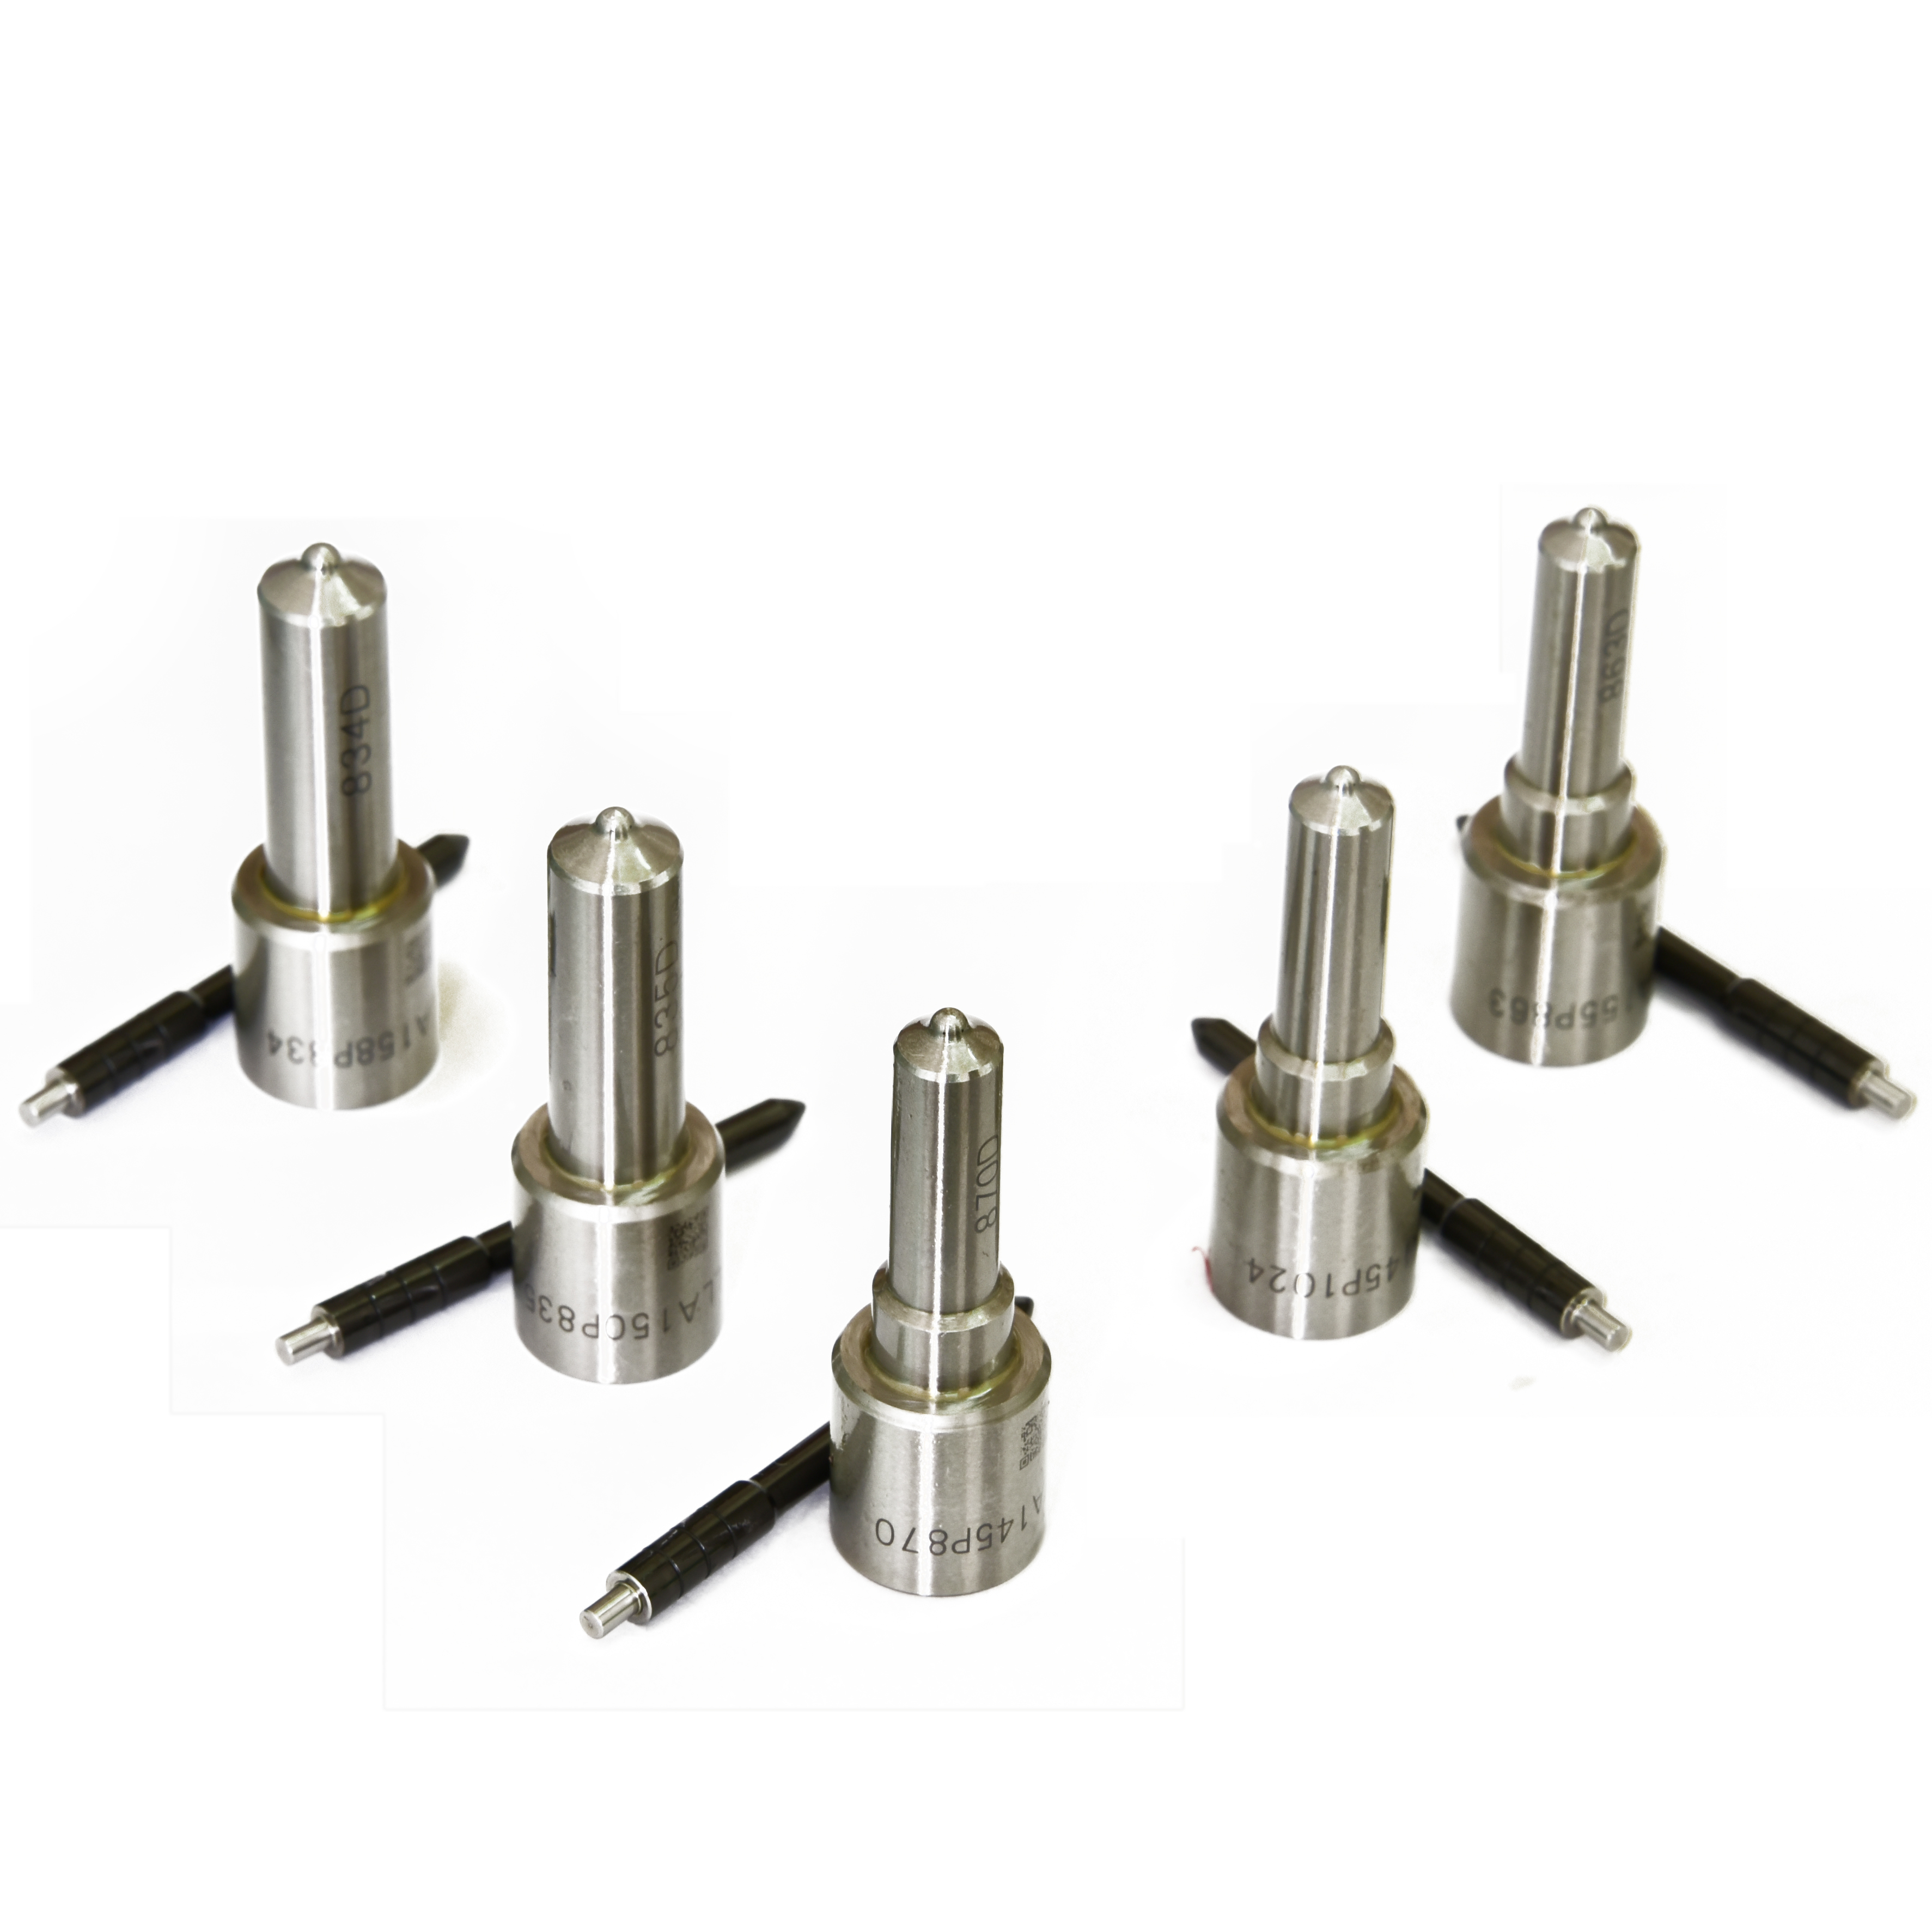 Matching table of nozzle for Bosch injector – 120 series